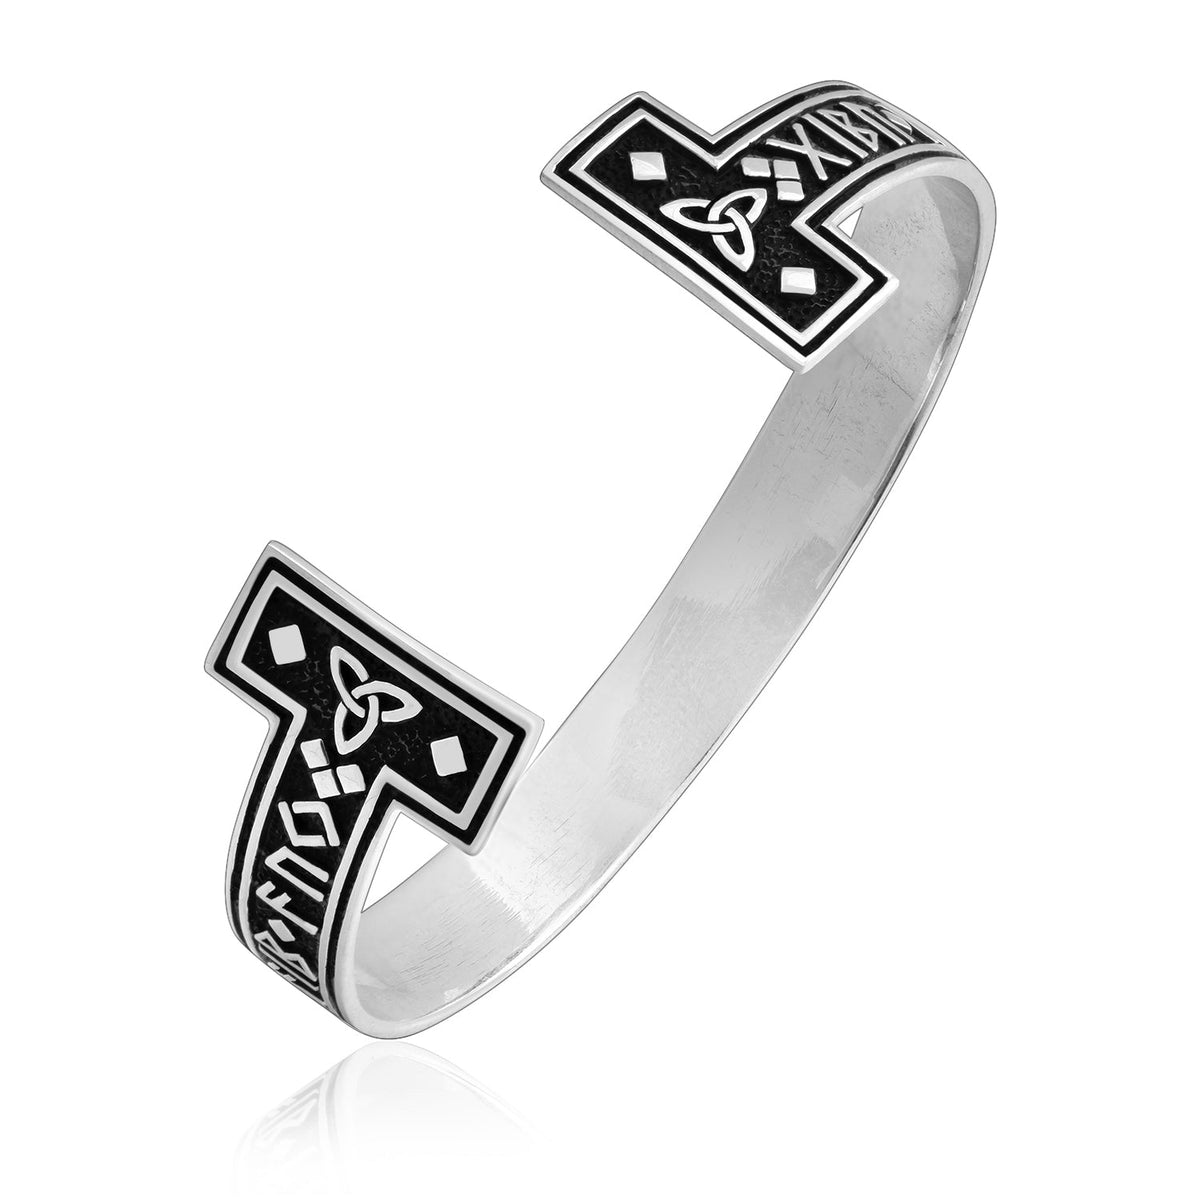 925 Sterling Silver Viking Runes Bangle with Celtic Triquetra - SilverMania925